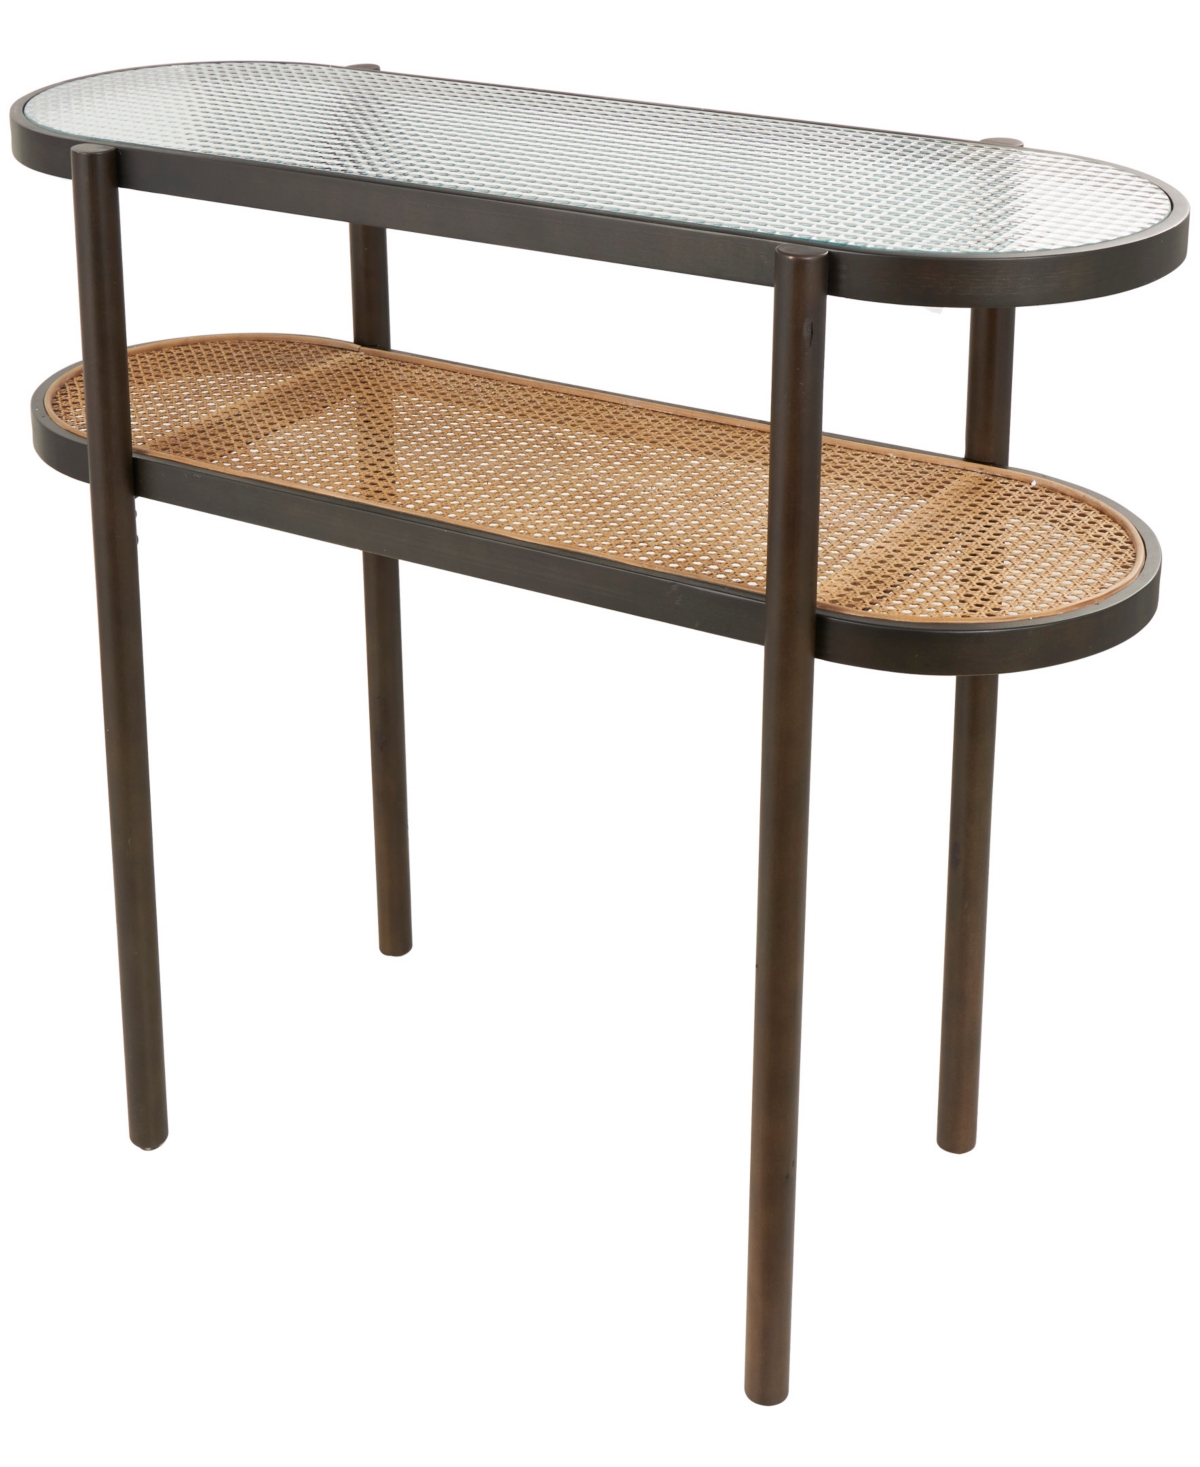 Rosemary Lane 44" X 18" X 32" Rattan Pressed Tempered Glass Top Console Table In Brown